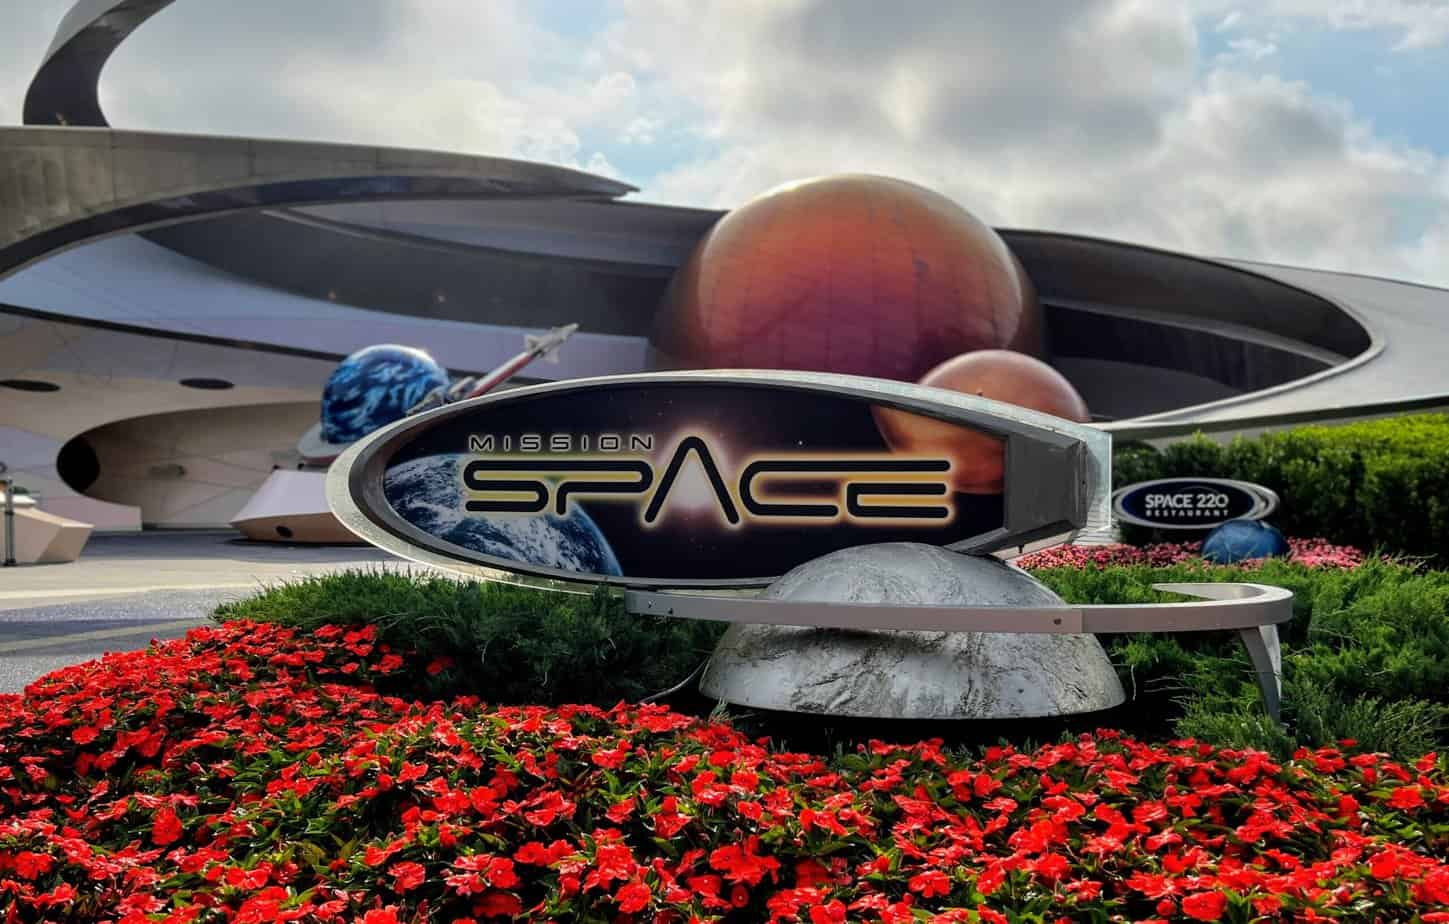 Is Mission: SPACE Too Scary For Kids? Parents Guide To Rides At Disney